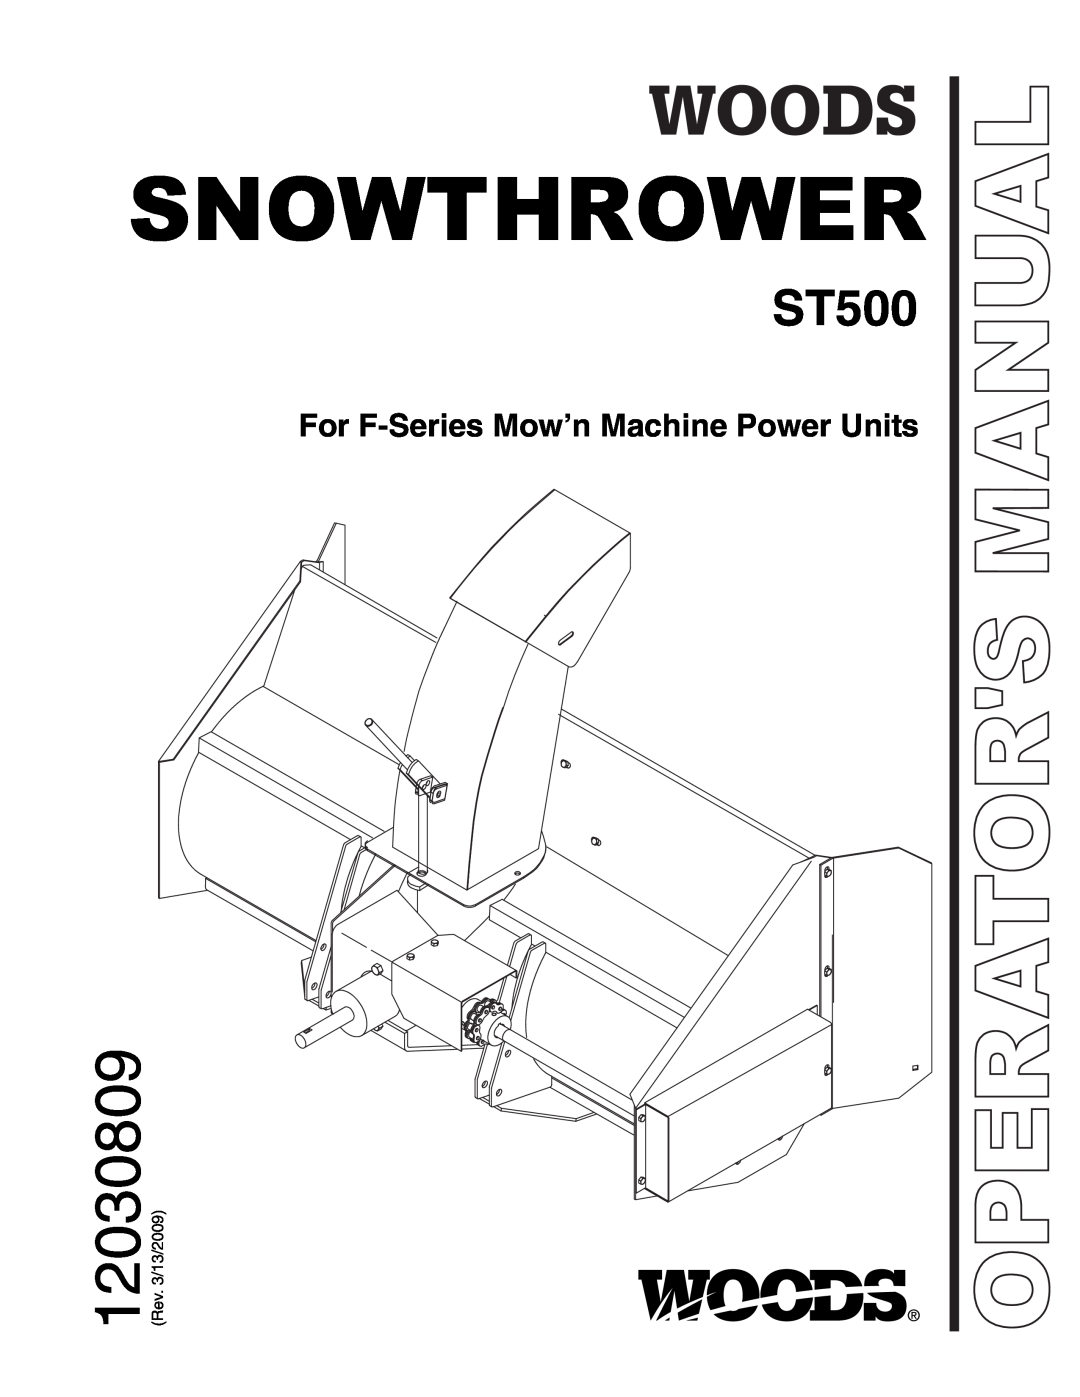 Woods Equipment ST500 manual For F-Series Mow’n Machine Power Units, Snowthrower, 12030809, Operators Manual 